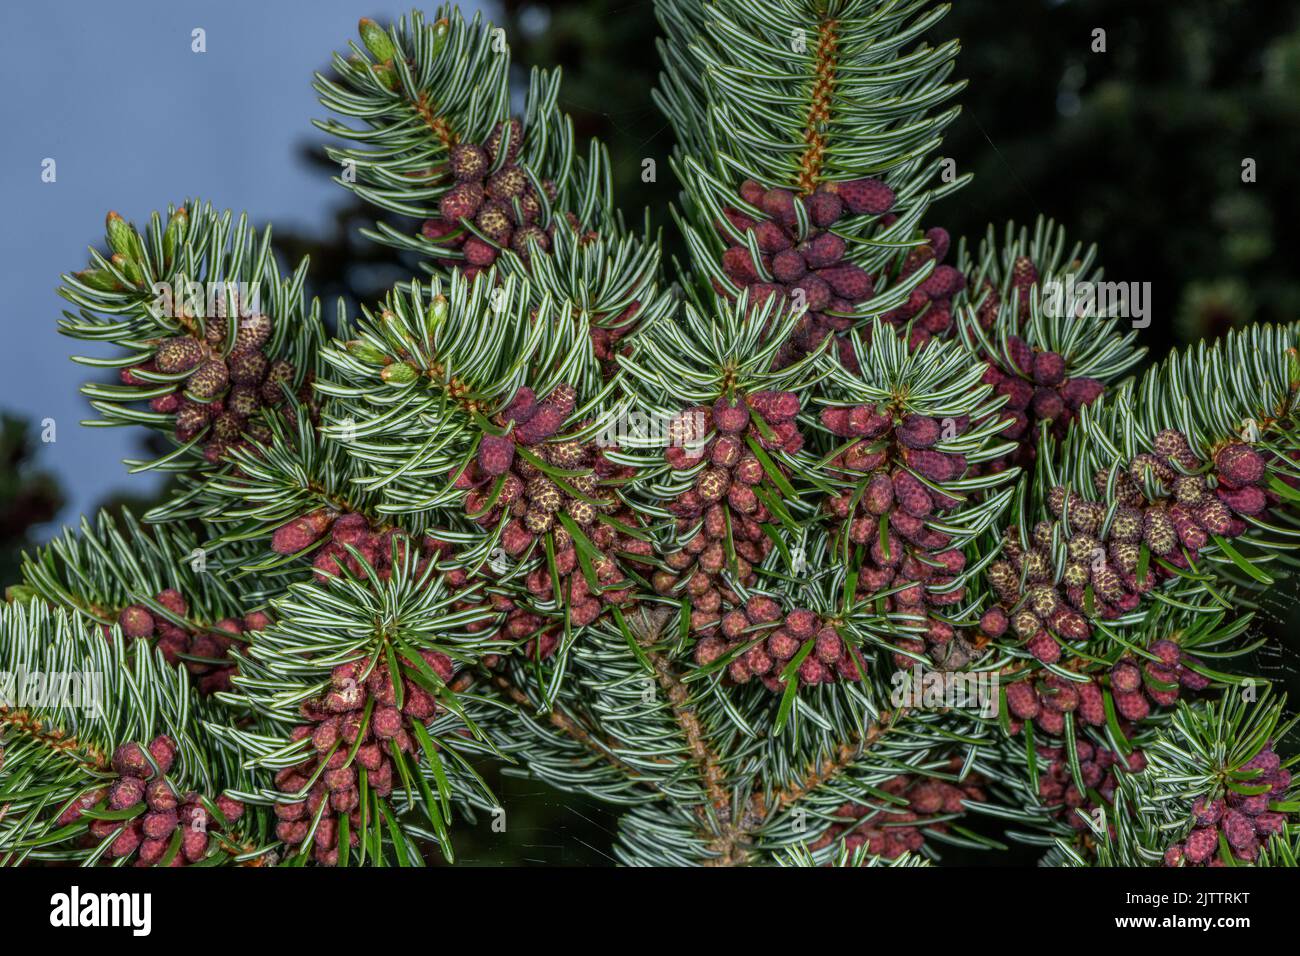 Male flowers and foliage of King Boris’ fir, Abies boris-regii, in the Pindos Mountains, Greece. Stock Photo